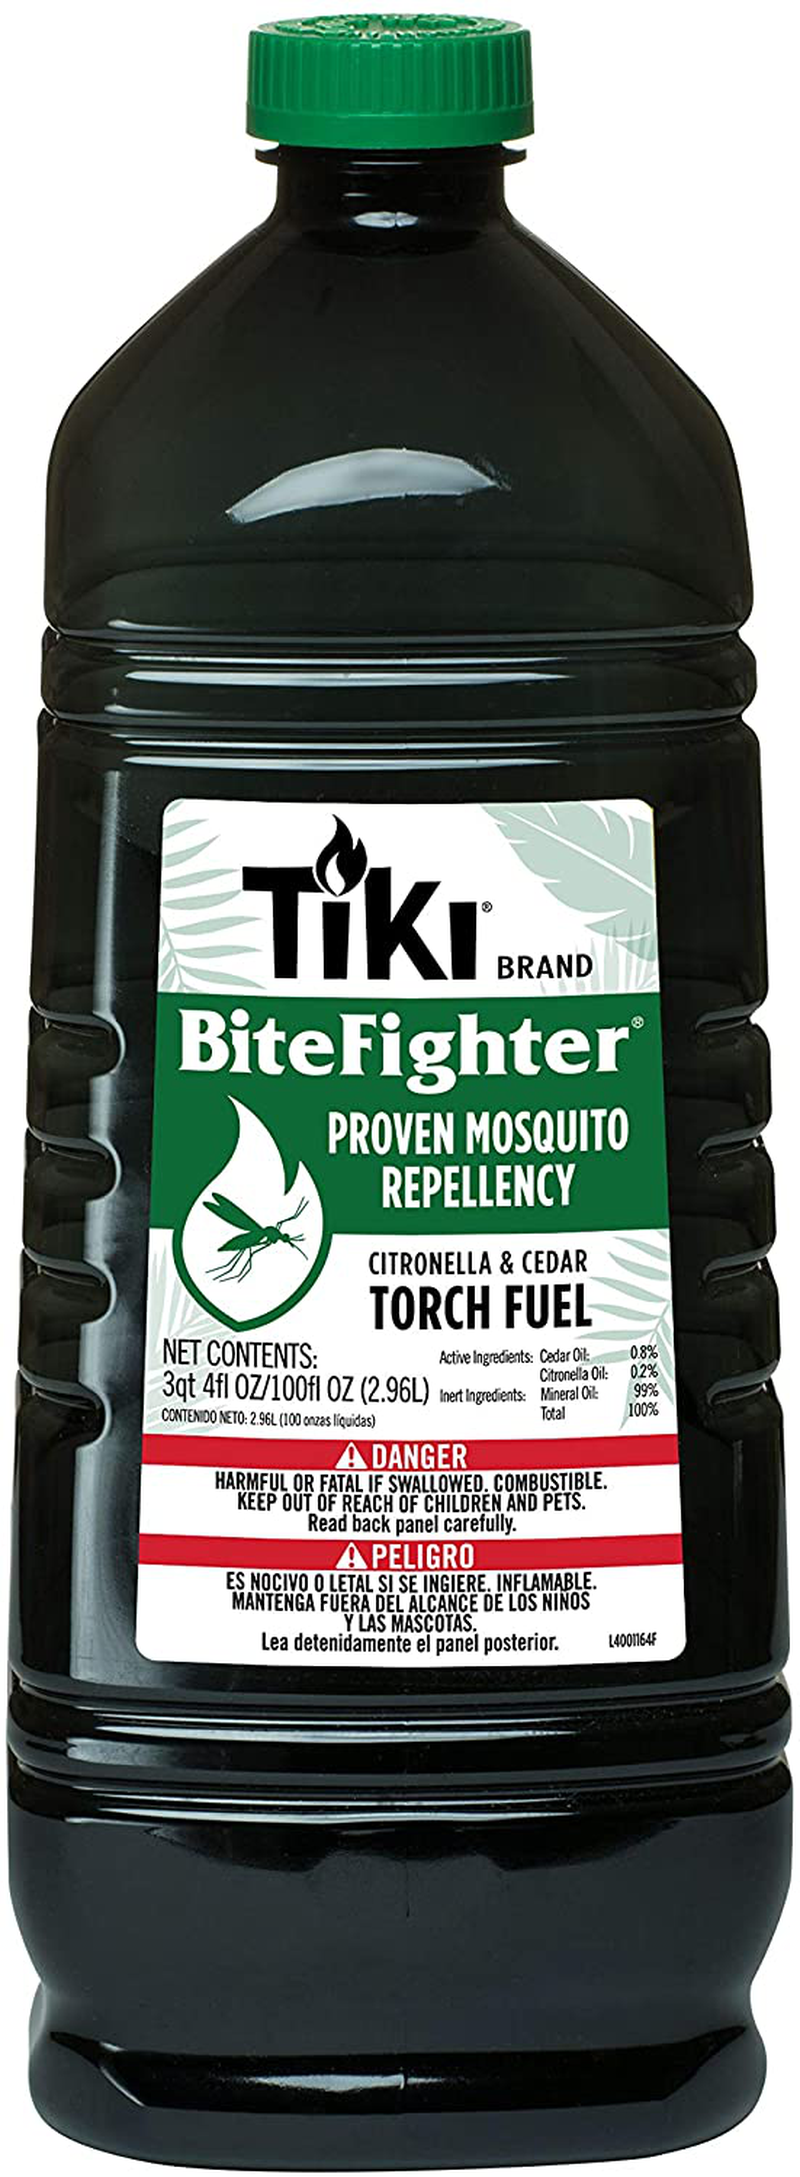 TIKI Brand Bitefighter Torch Fuel, 100 Ounces